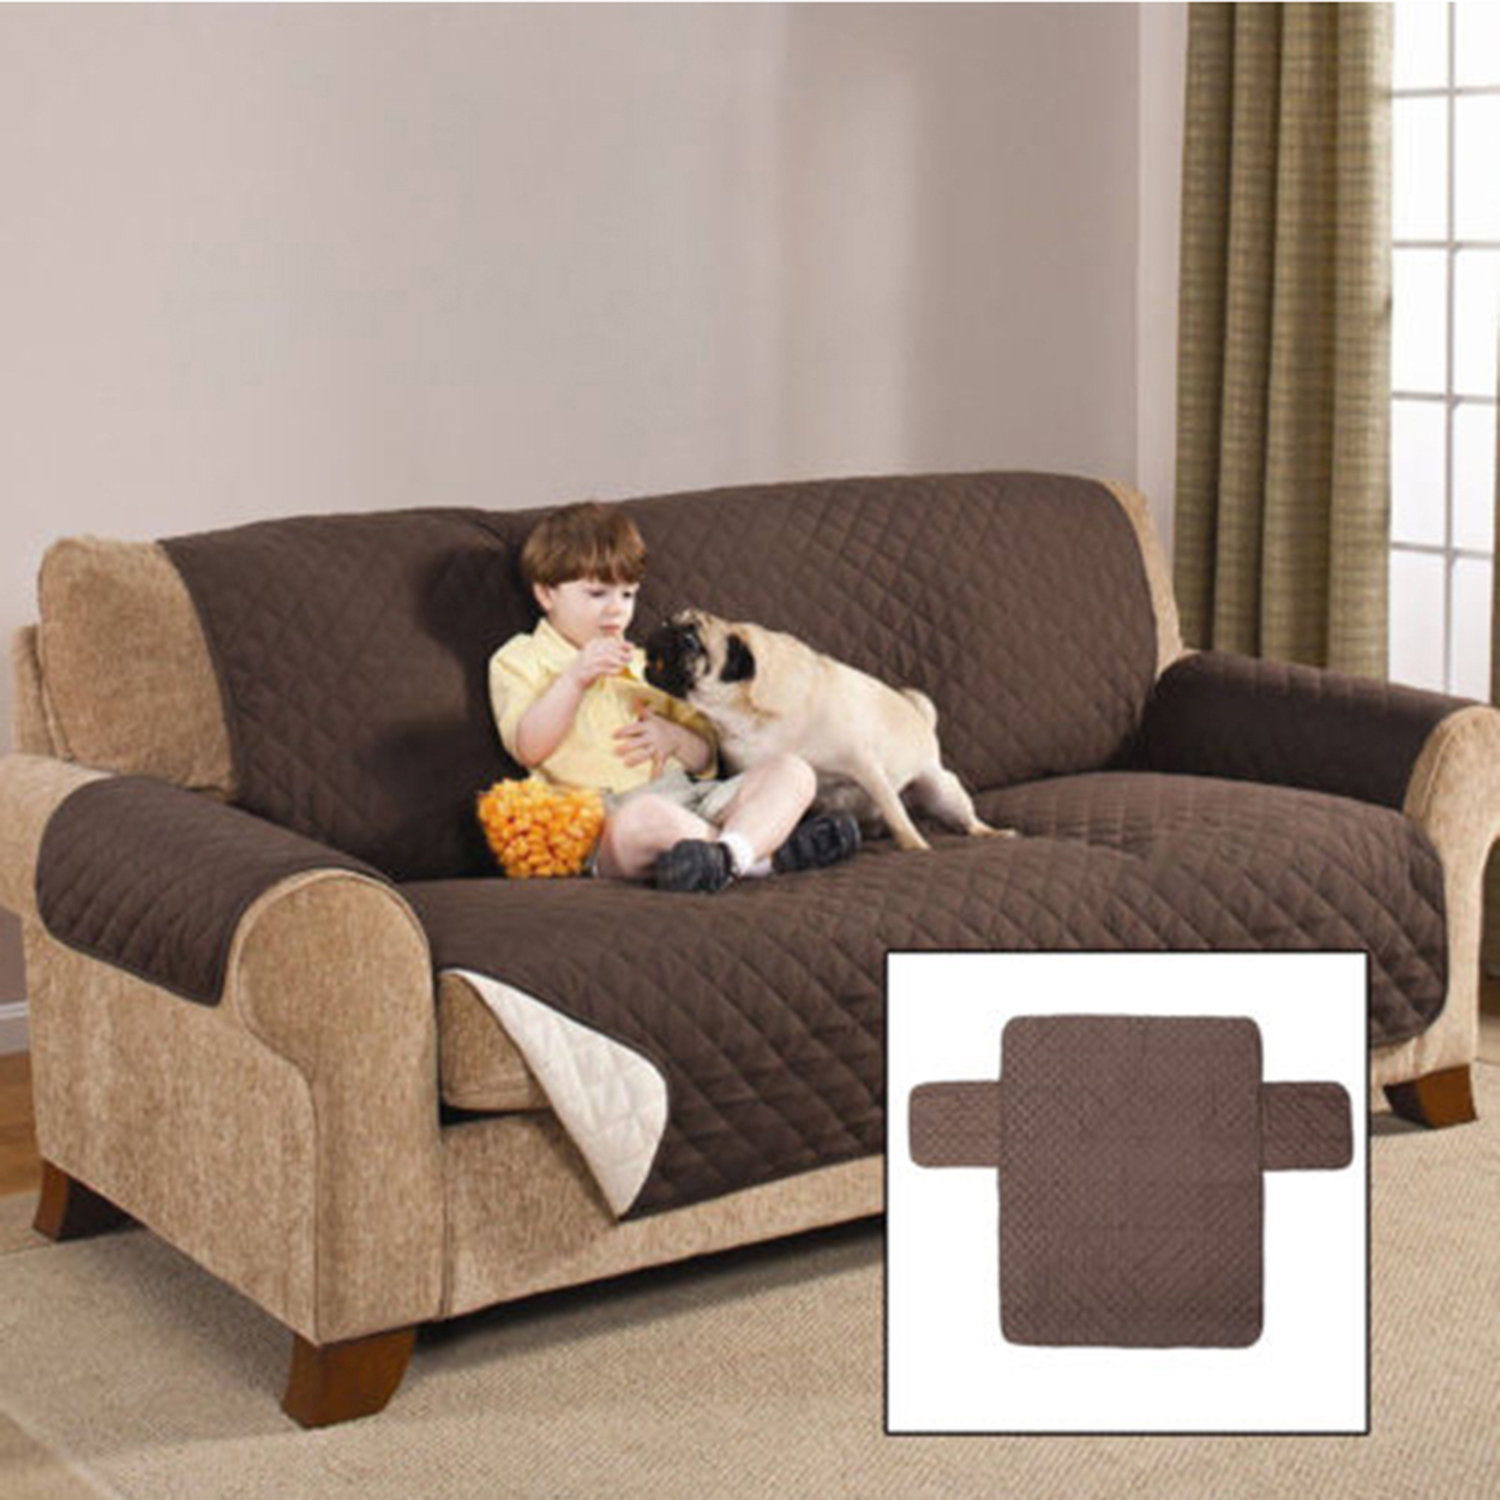 Reversible Quilted Waterproof Sofa Slip Cover, Furniture Pet Protector Throw Sofa Protector Cover for home diy tools parts